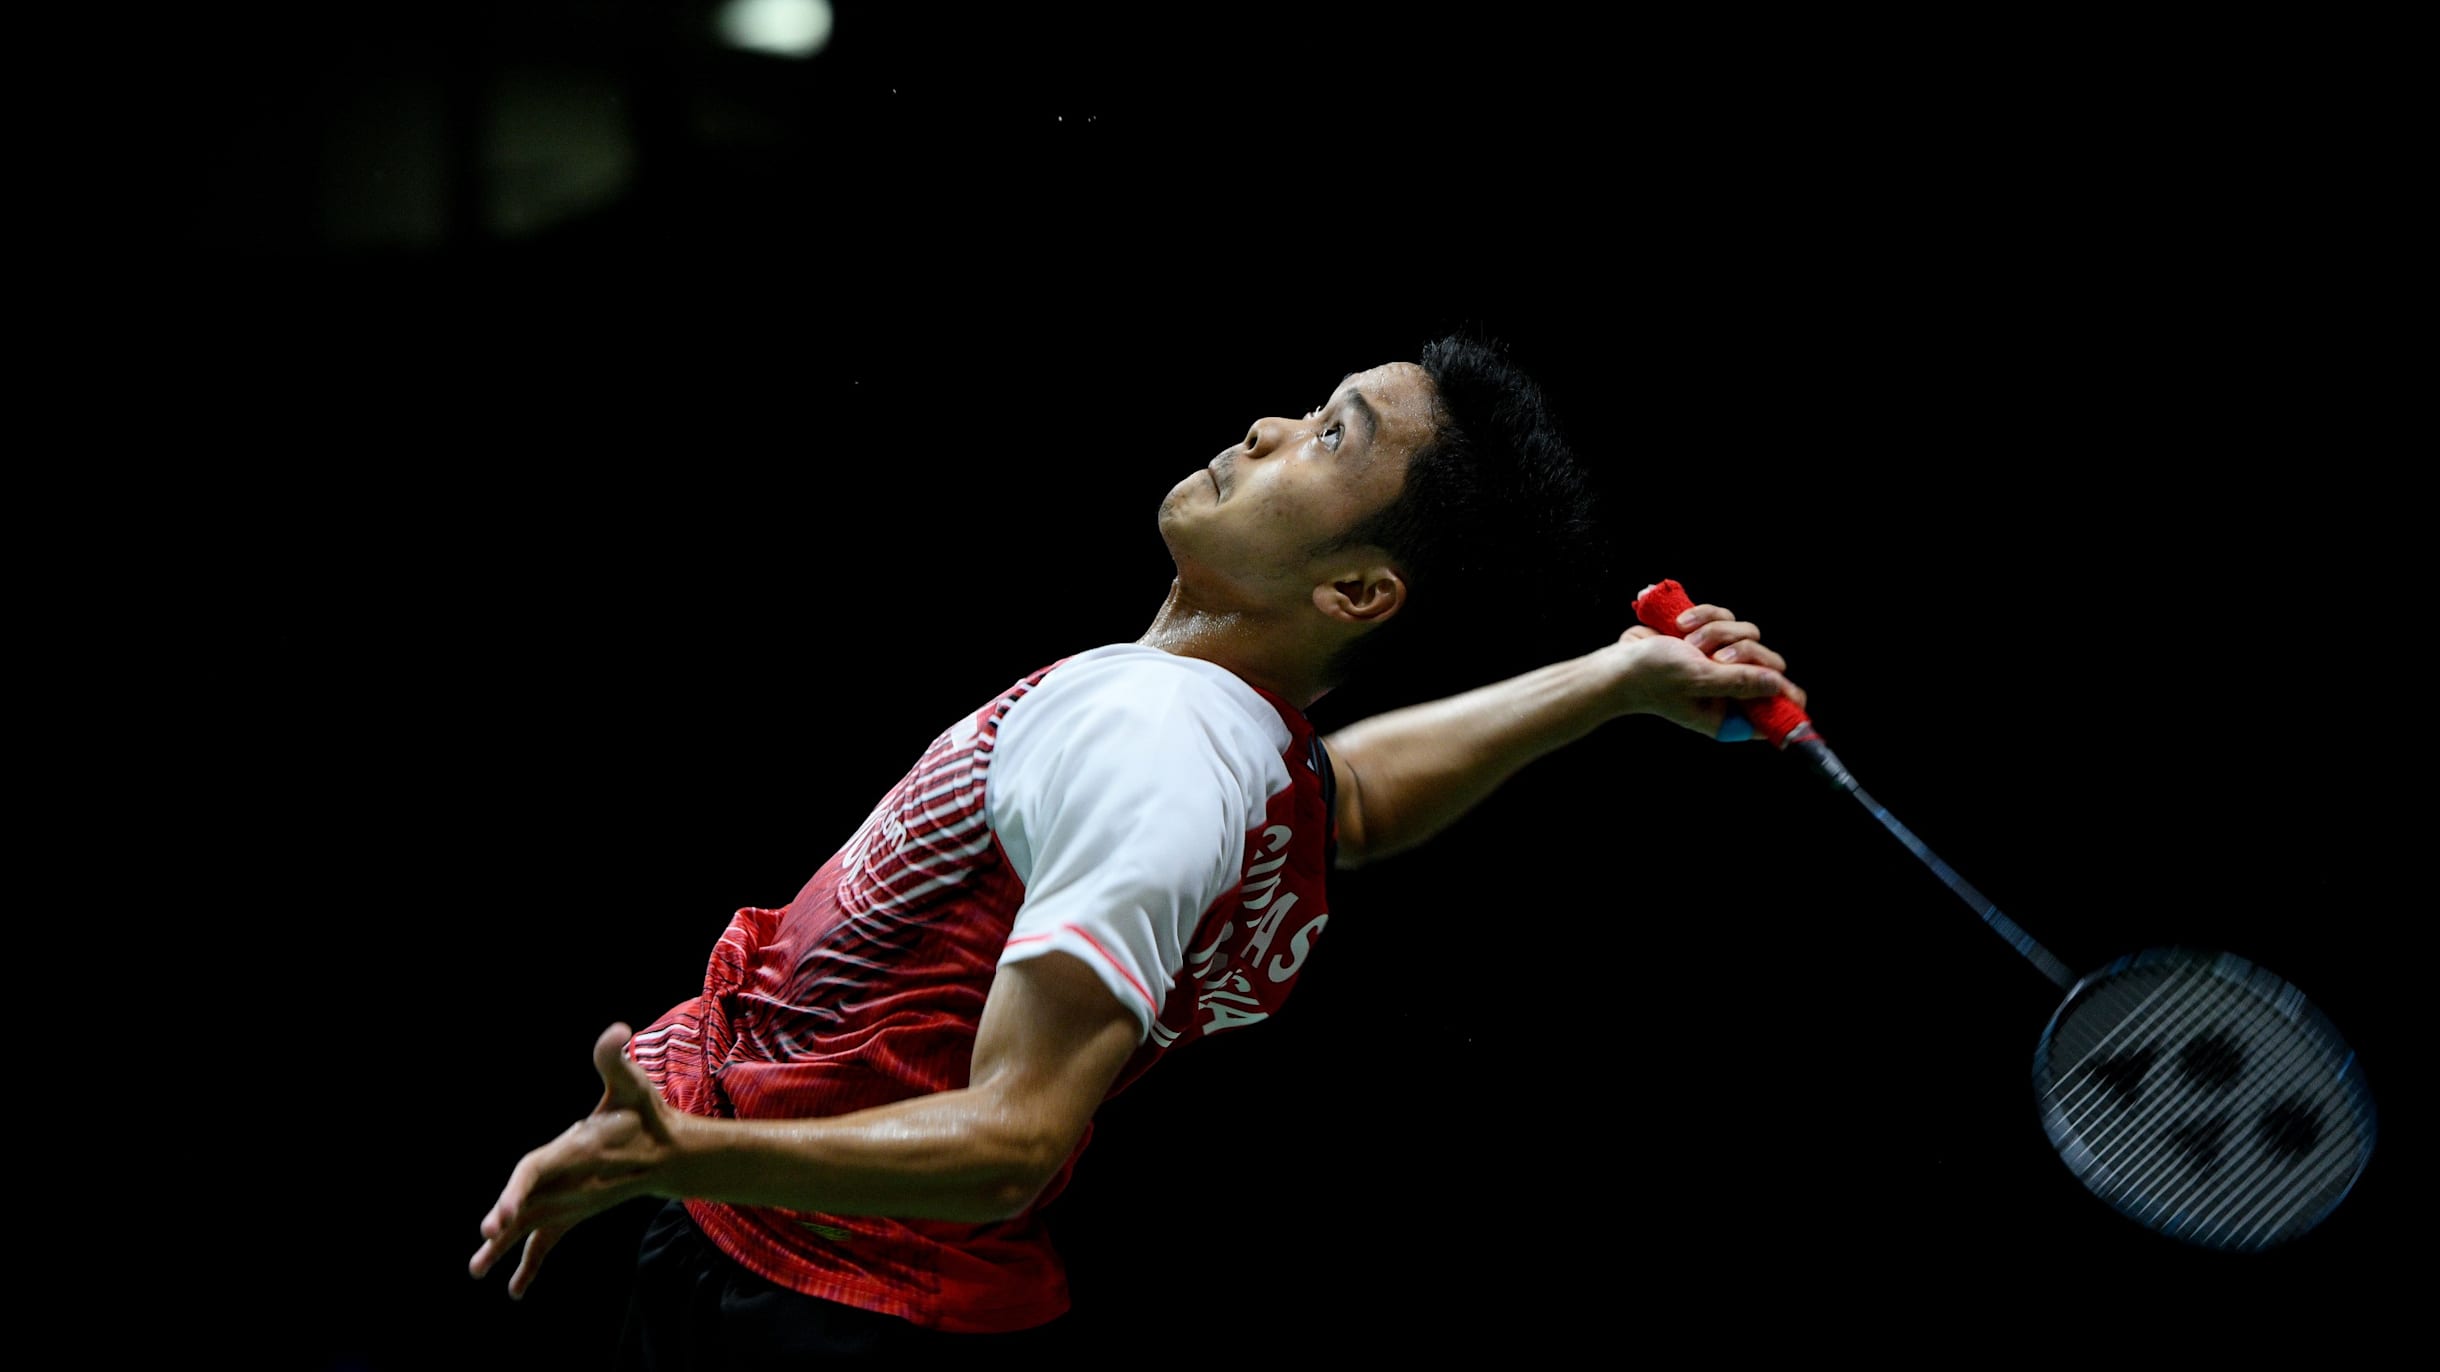 Anthony Sinisuka Ginting next in line for Indonesian badminton immortality?